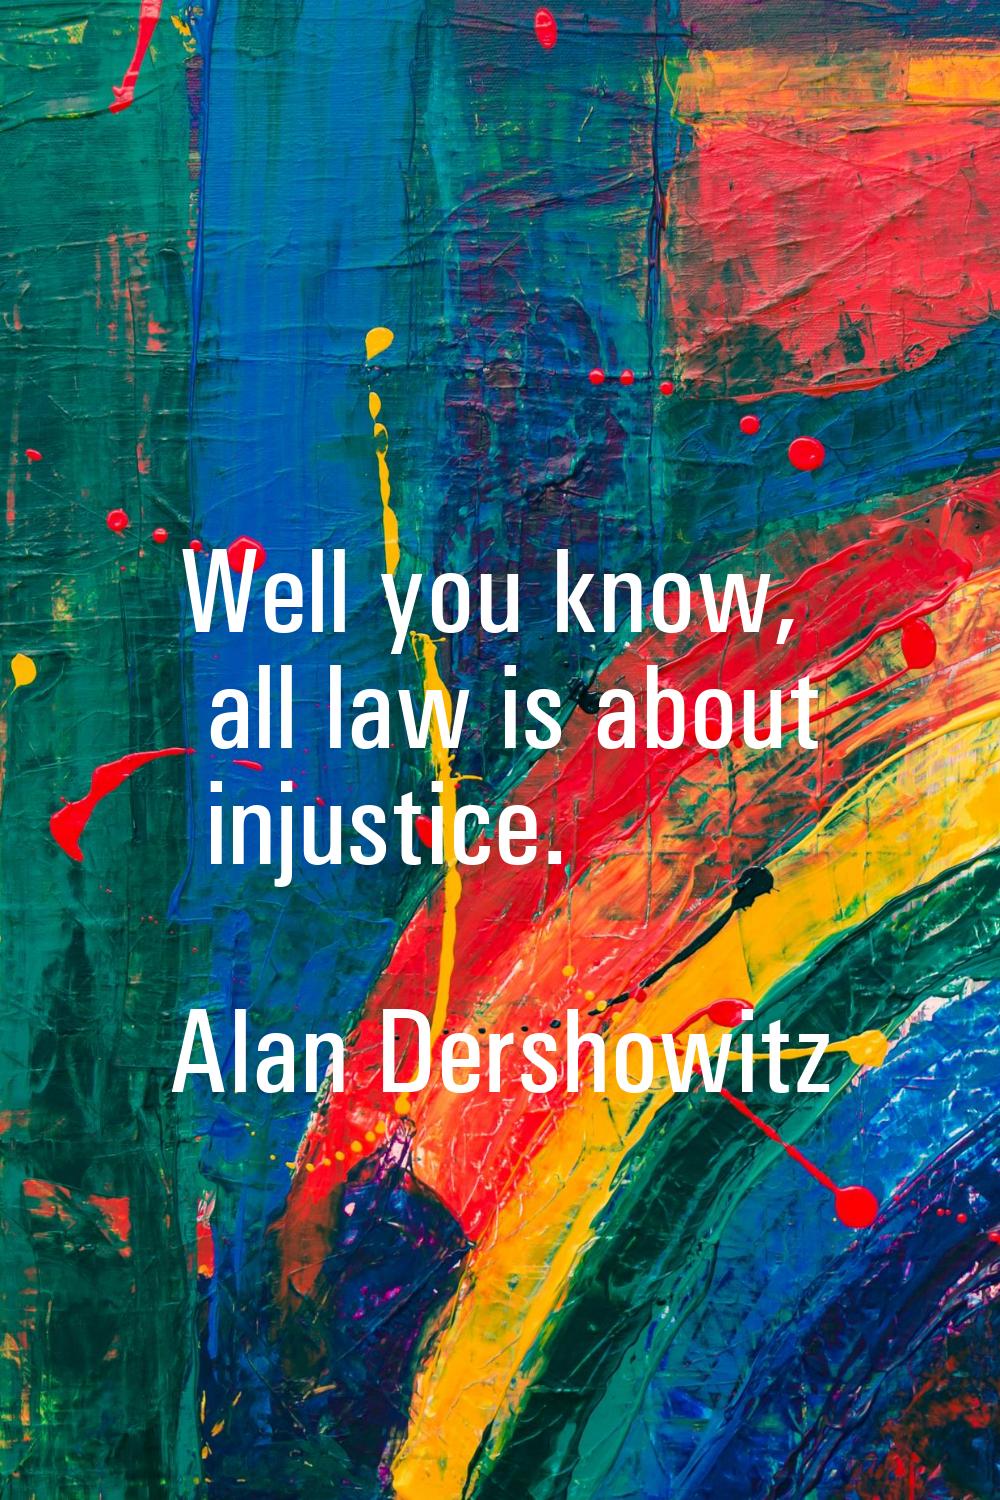 Well you know, all law is about injustice.